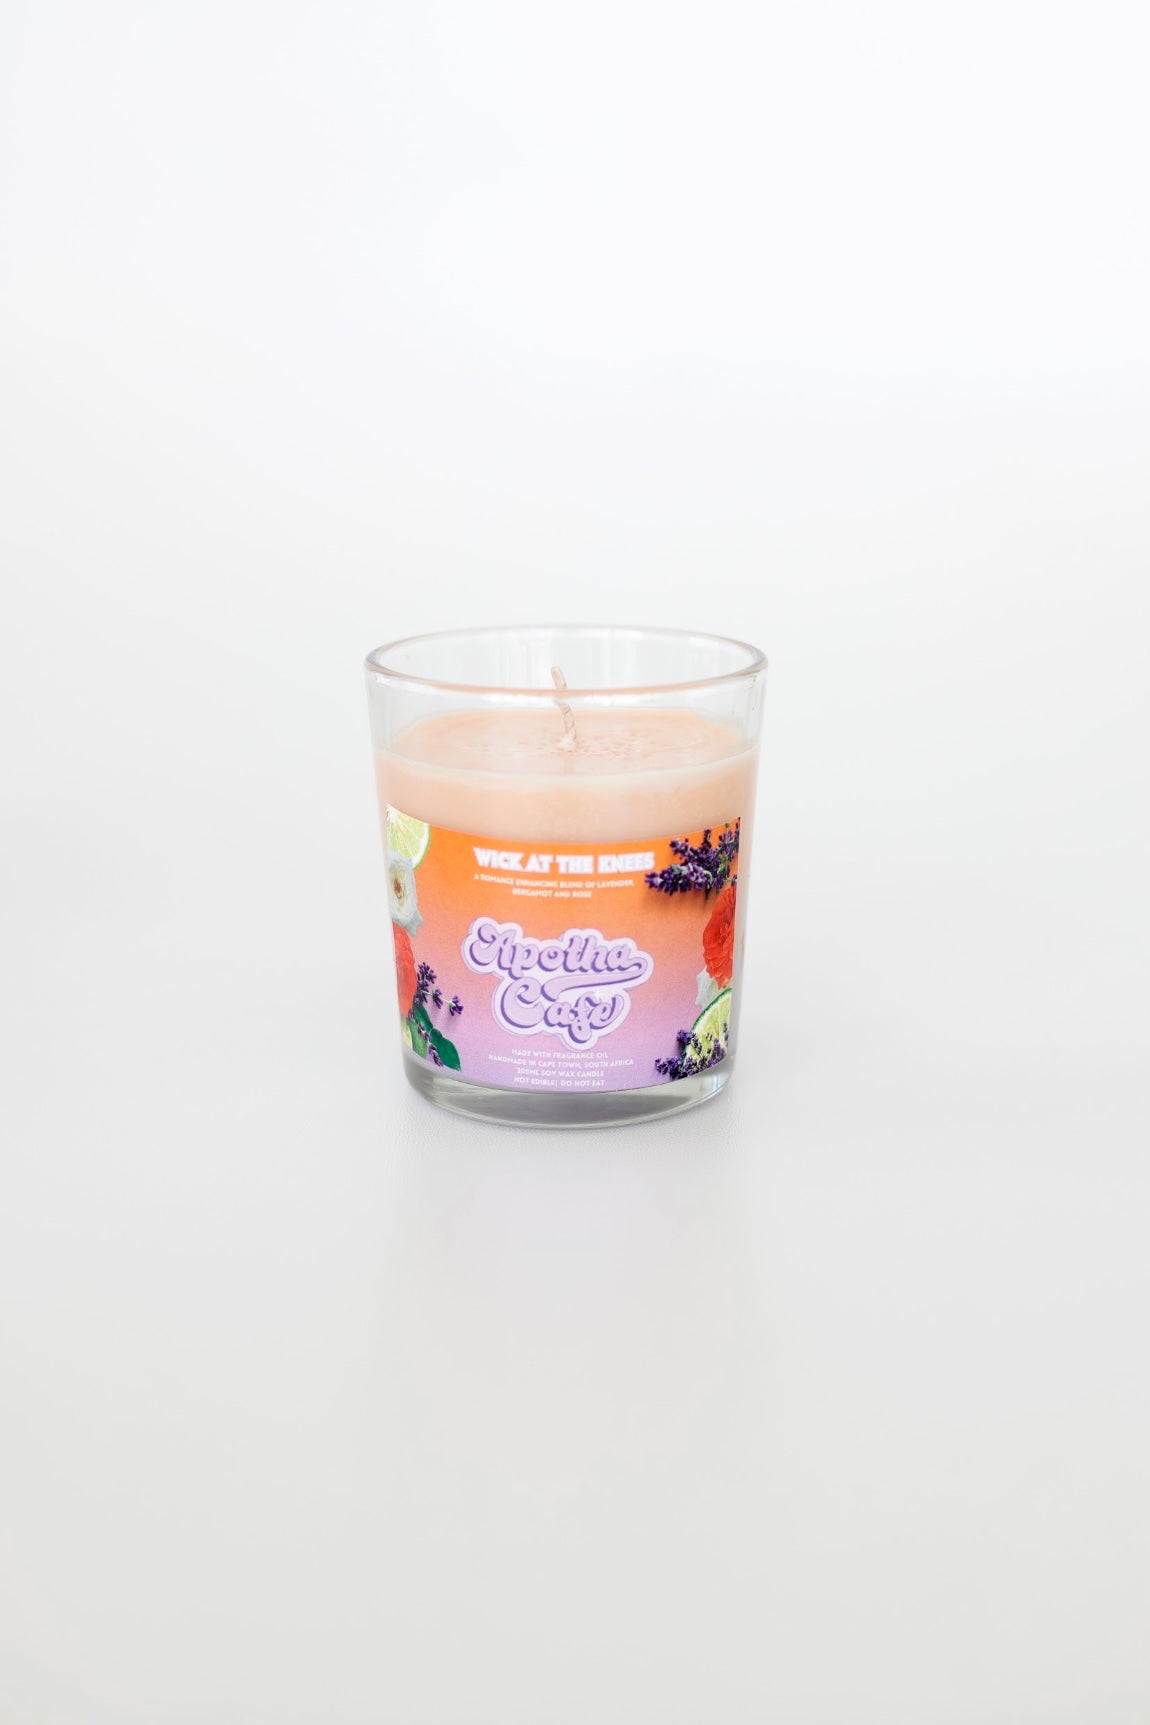 Wick at the Knees Classic Candle